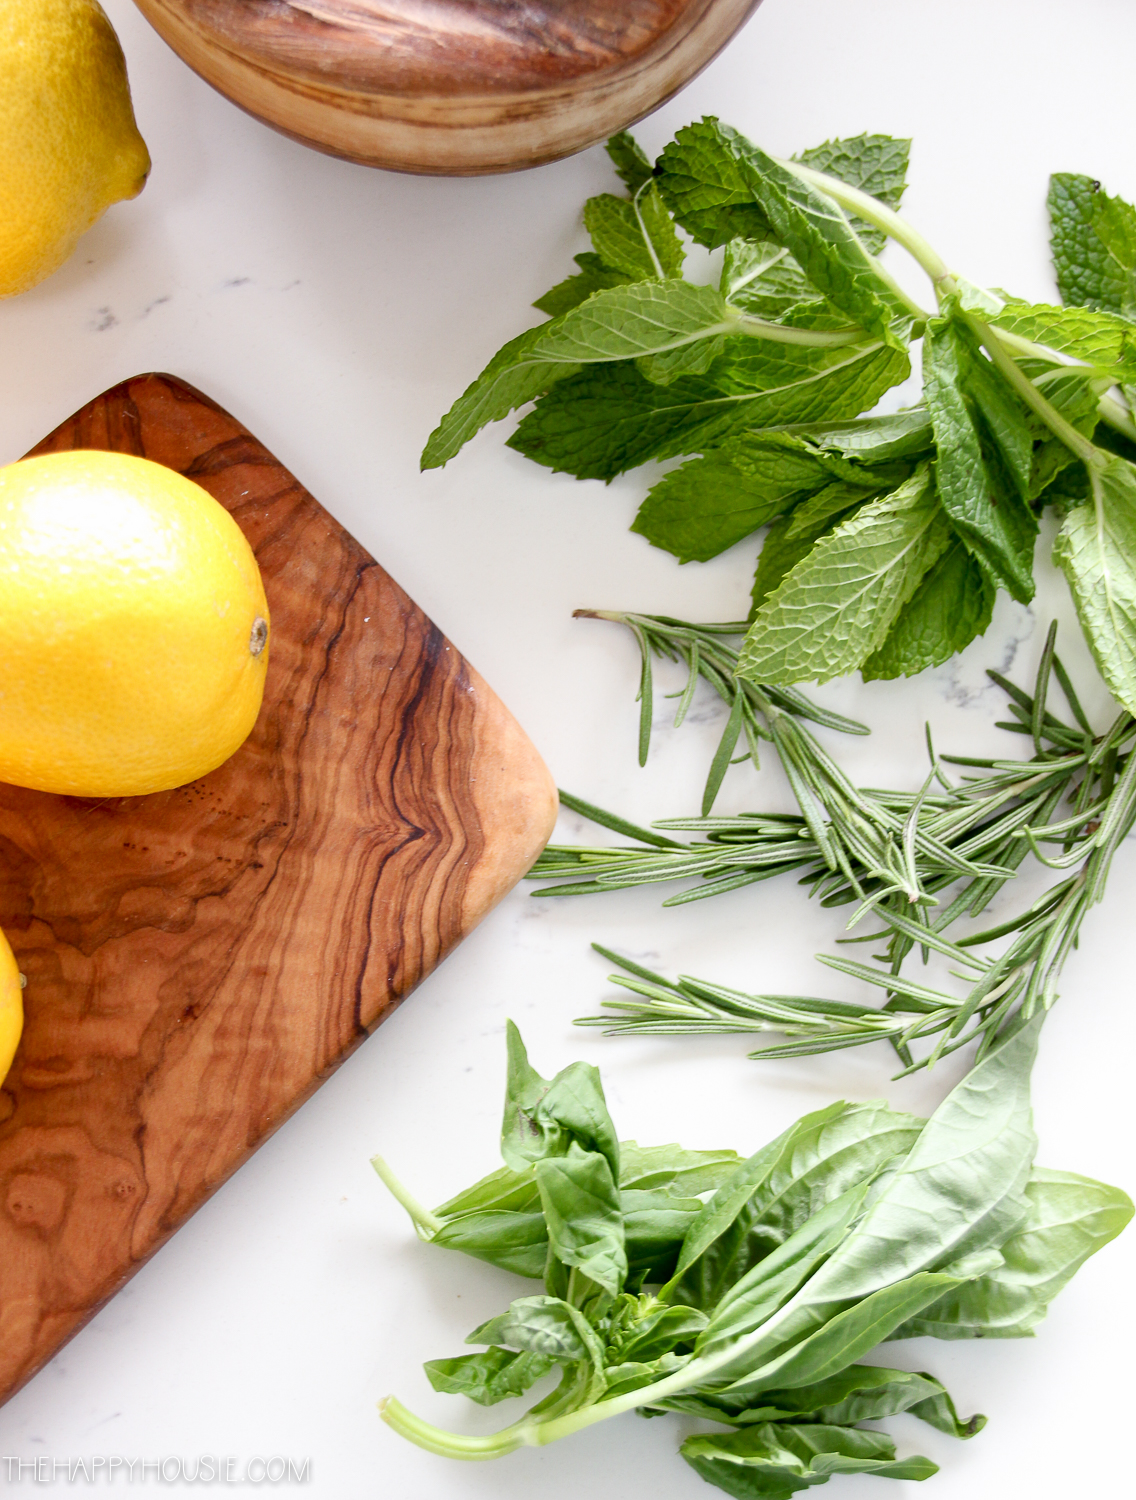 Herbs on the counter beside a wooden cutting board with a lemon on it.